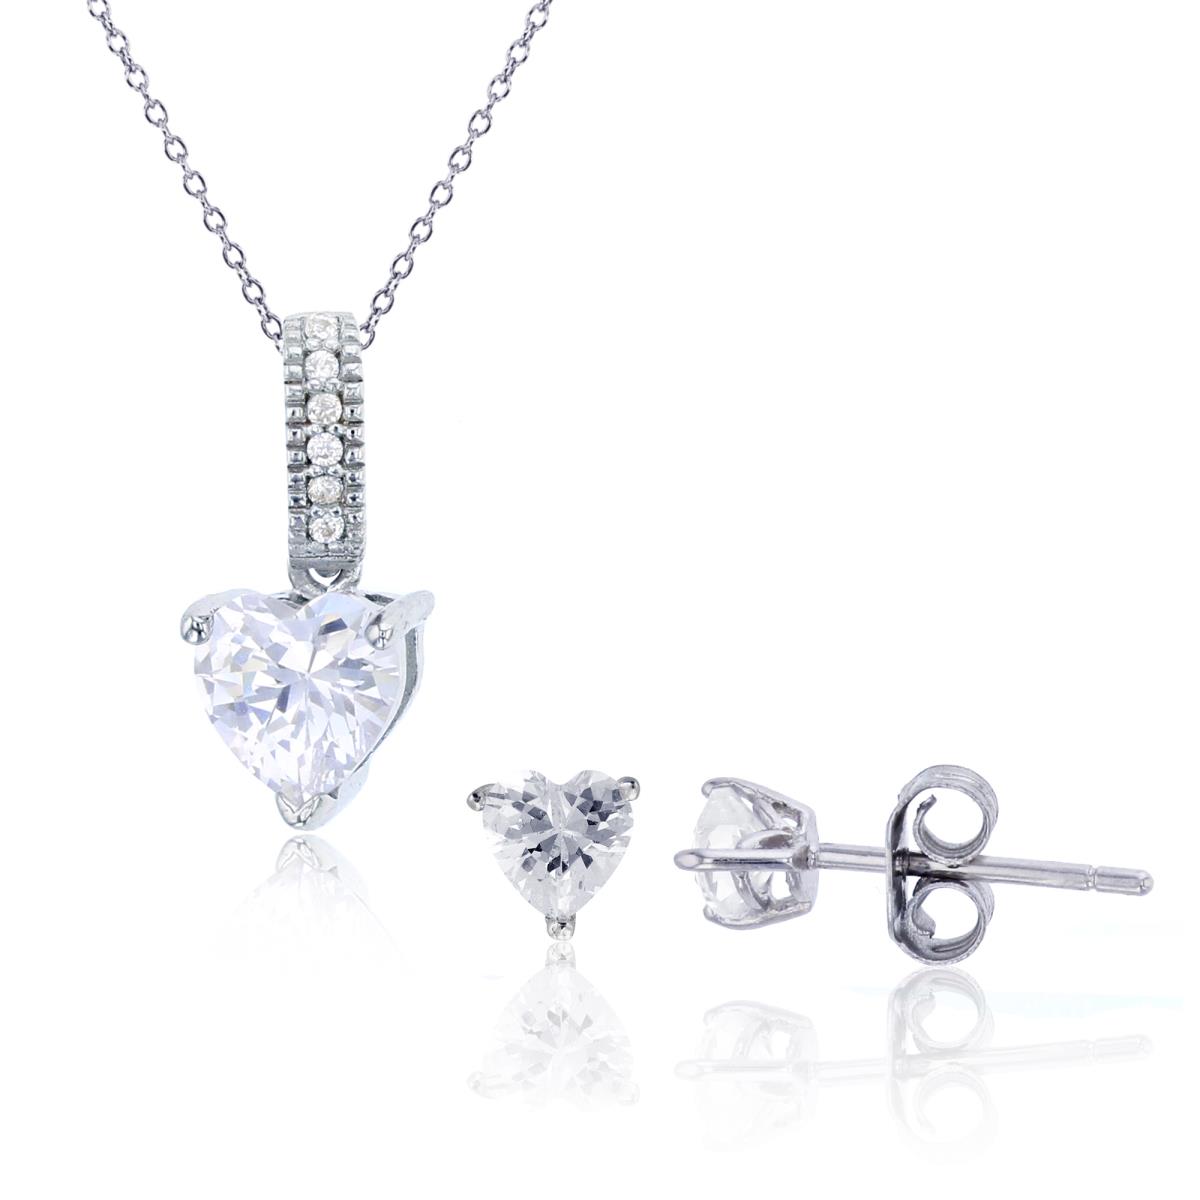 Sterling Silver Rhodium 6mm Heart Shape Paved Bail 18" Necklace & 4mm Heart Solitaire Stud Earring Set